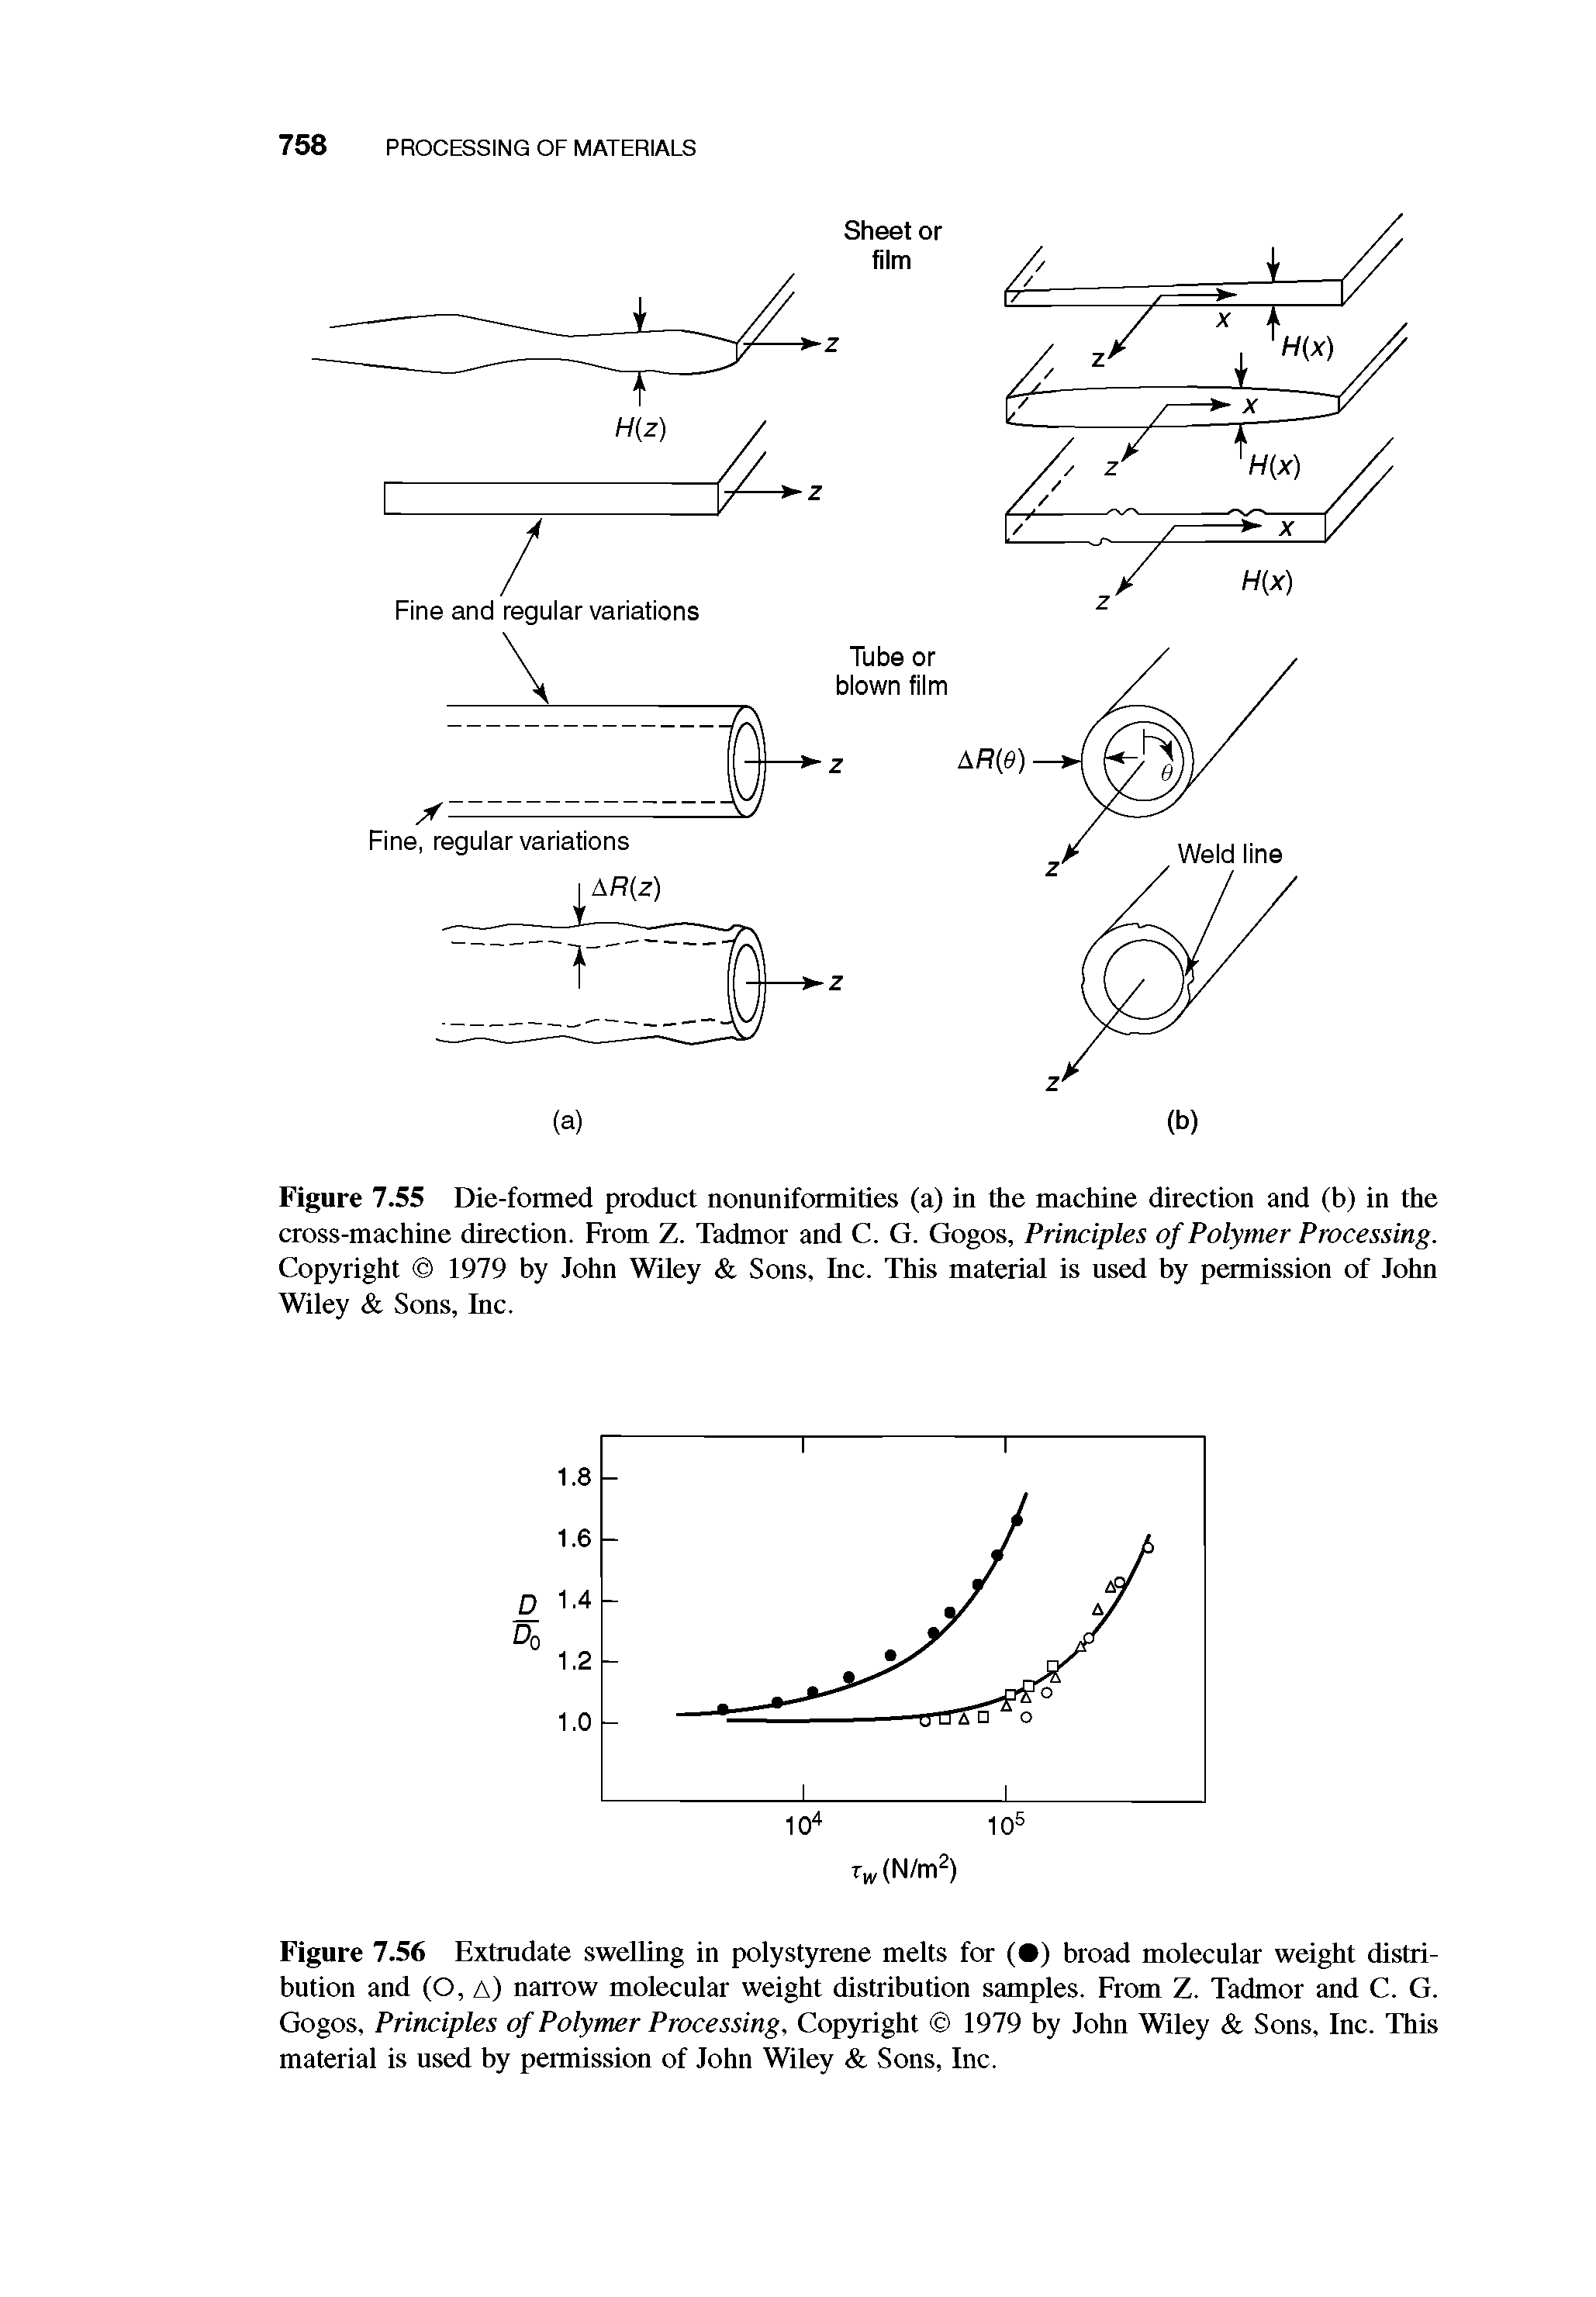 Figure 7.55 Die-formed product nonuniformities (a) in the machine direction and (b) in the cross-machine direction. From Z. Tadmor and C. G. Gogos, Principles of Polymer Processing. Copyright 1979 by John Wiley Sons, Inc. This material is used by permission of John Wiley Sons, Inc.